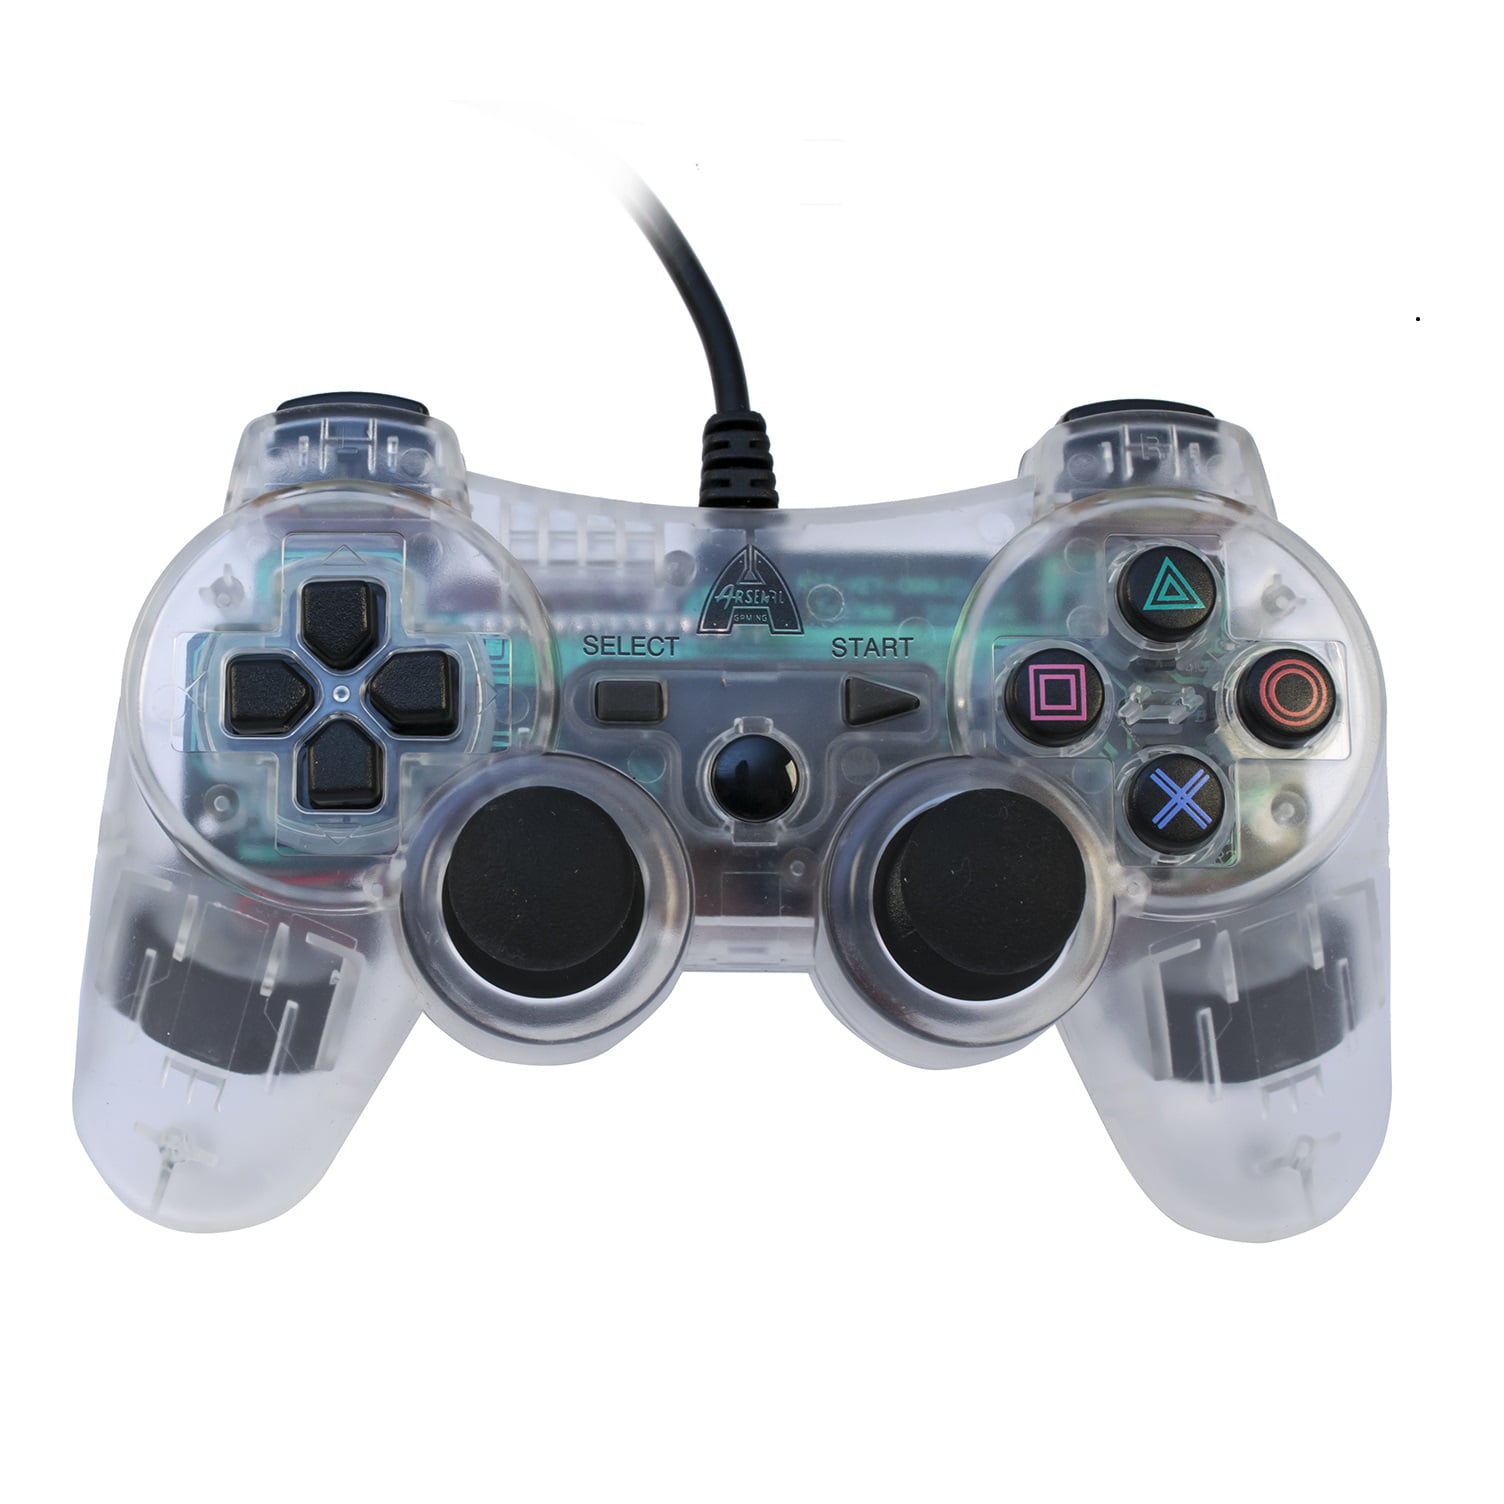 Arsenal Gaming Ps3 Wired Controller Clear With Lights Walmart